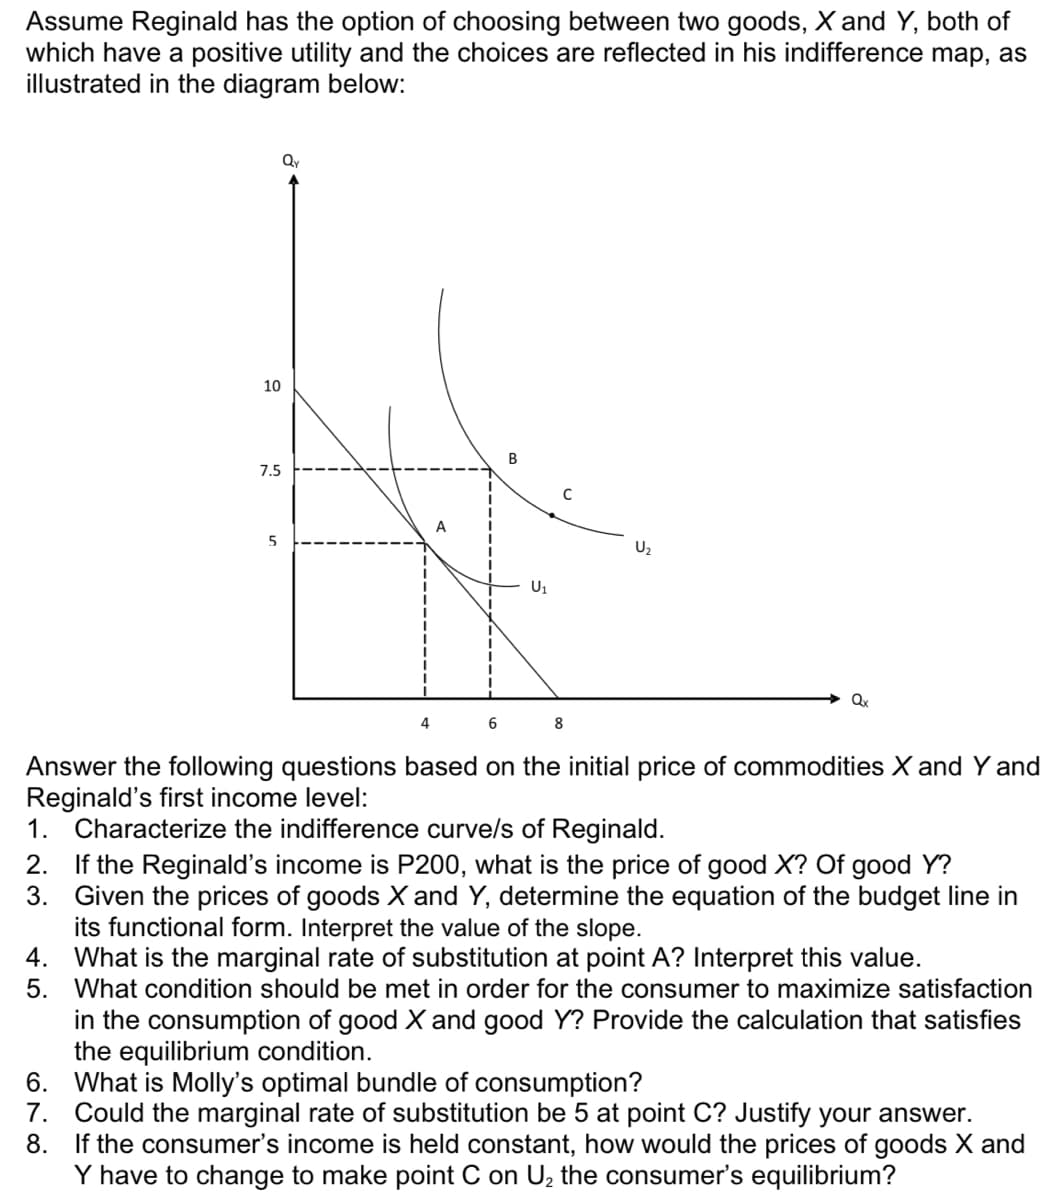 Assume Reginald has the option of choosing between two goods, X and Y, both of
which have a positive utility and the choices are reflected in his indifference map, as
illustrated in the diagram below:
Qy
10
7.5
C
A
U2
U1
Qx
4
6
Answer the following questions based on the initial price of commodities X and Y and
Reginald's first income level:
1. Characterize the indifference curve/s of Reginald.
2. If the Reginald's income is P200, what is the price of good X? Of good Y?
Given the prices of goods X and Y, determine the equation of the budget line in
its functional form. Interpret the value of the slope.
4. What is the marginal rate of substitution at point A? Interpret this value.
5. What condition should be met in order for the consumer to maximize satisfaction
in the consumption of good X and good Y? Provide the calculation that satisfies
the equilibrium condition.
6. What is Molly's optimal bundle of consumption?
7.
3.
Could the marginal rate of substitution be 5 at point C? Justify your answer.
8. If the consumer's income is held constant, how would the prices of goods X and
Y have to change to make point C on U, the consumer's equilibrium?
